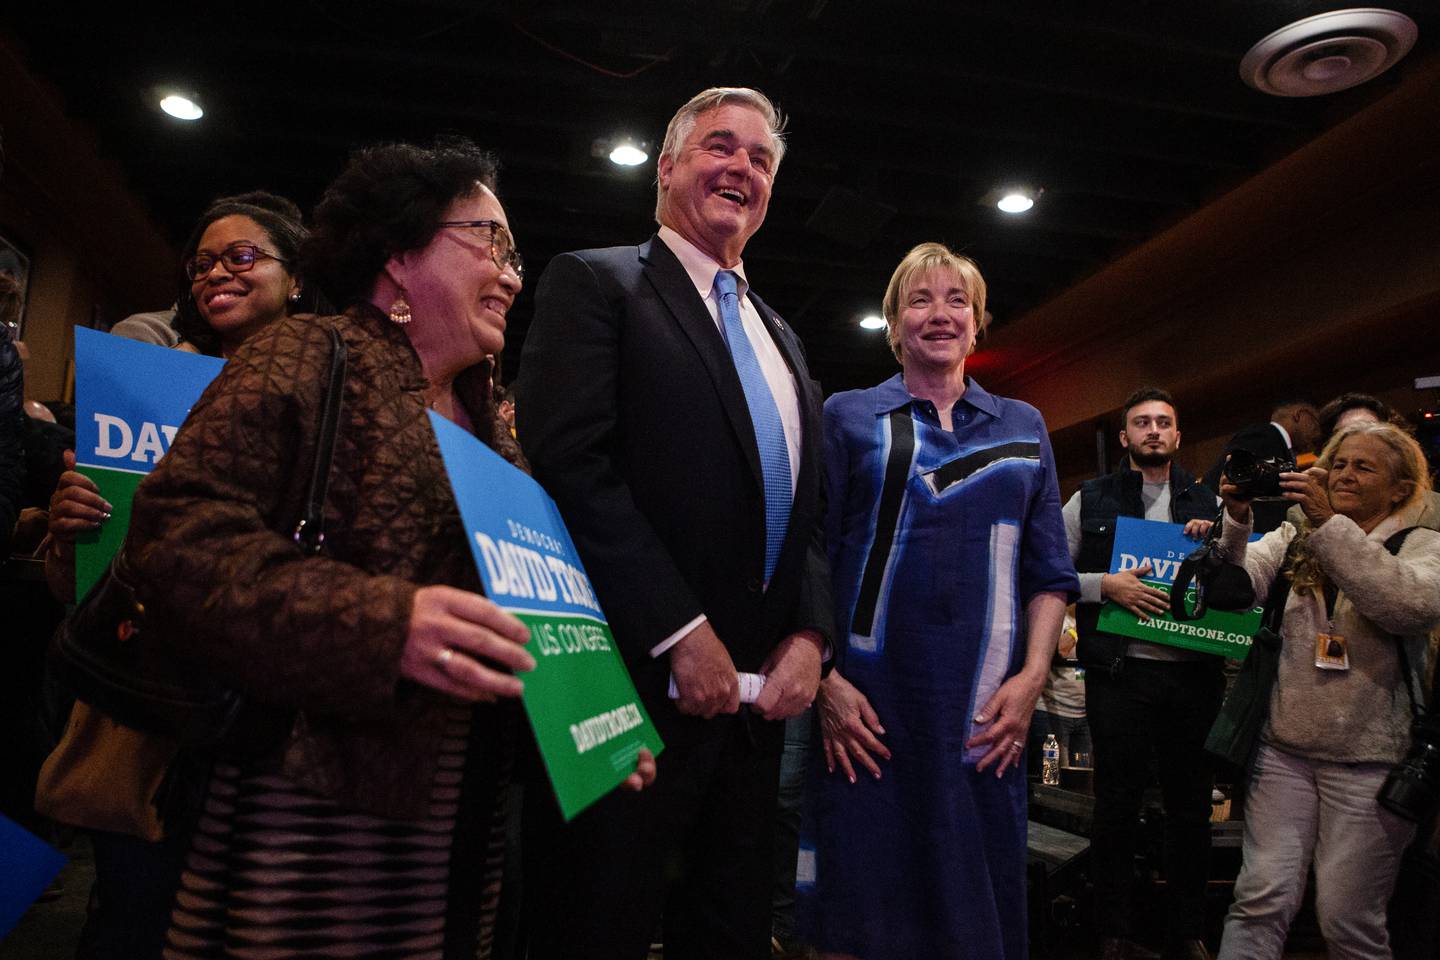 Supporters greet Congressman David Trone and his wife, June Trone (right), at his election night event at Gabriel Mt. Food Co. in Frederick on Tuesday, November 8, 2022.